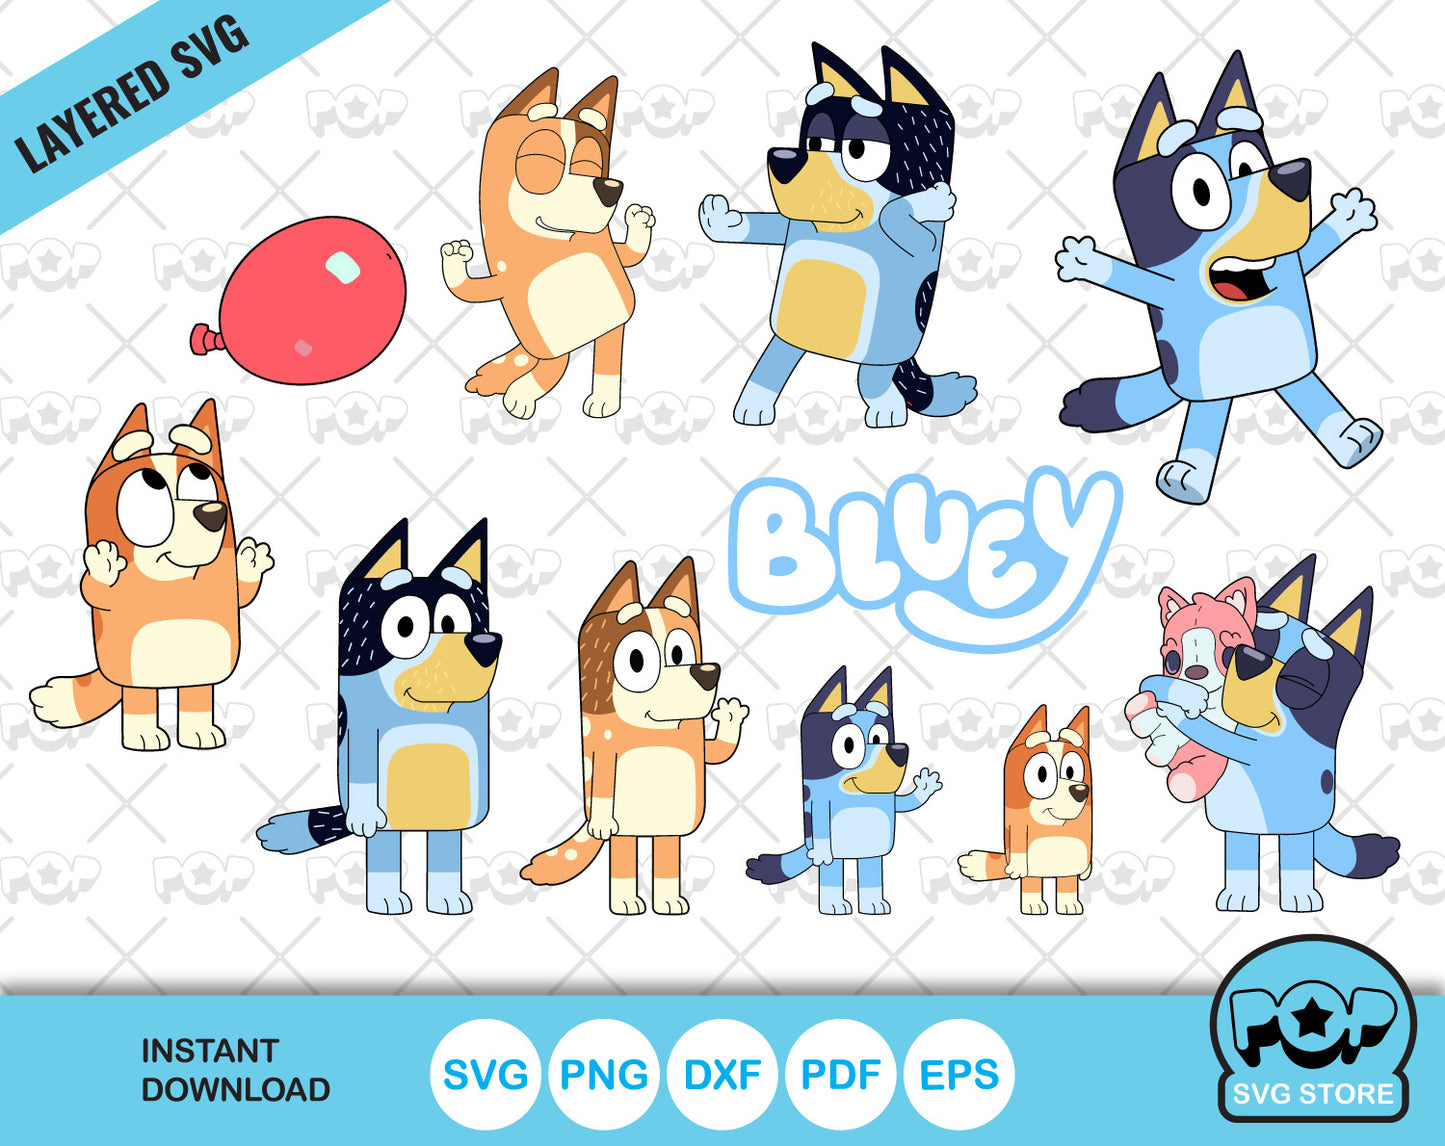 Bluey Clipart Bundle, Bluey the dog SVG cut files for Cricut / Silhouette, PNG DXF, instant download